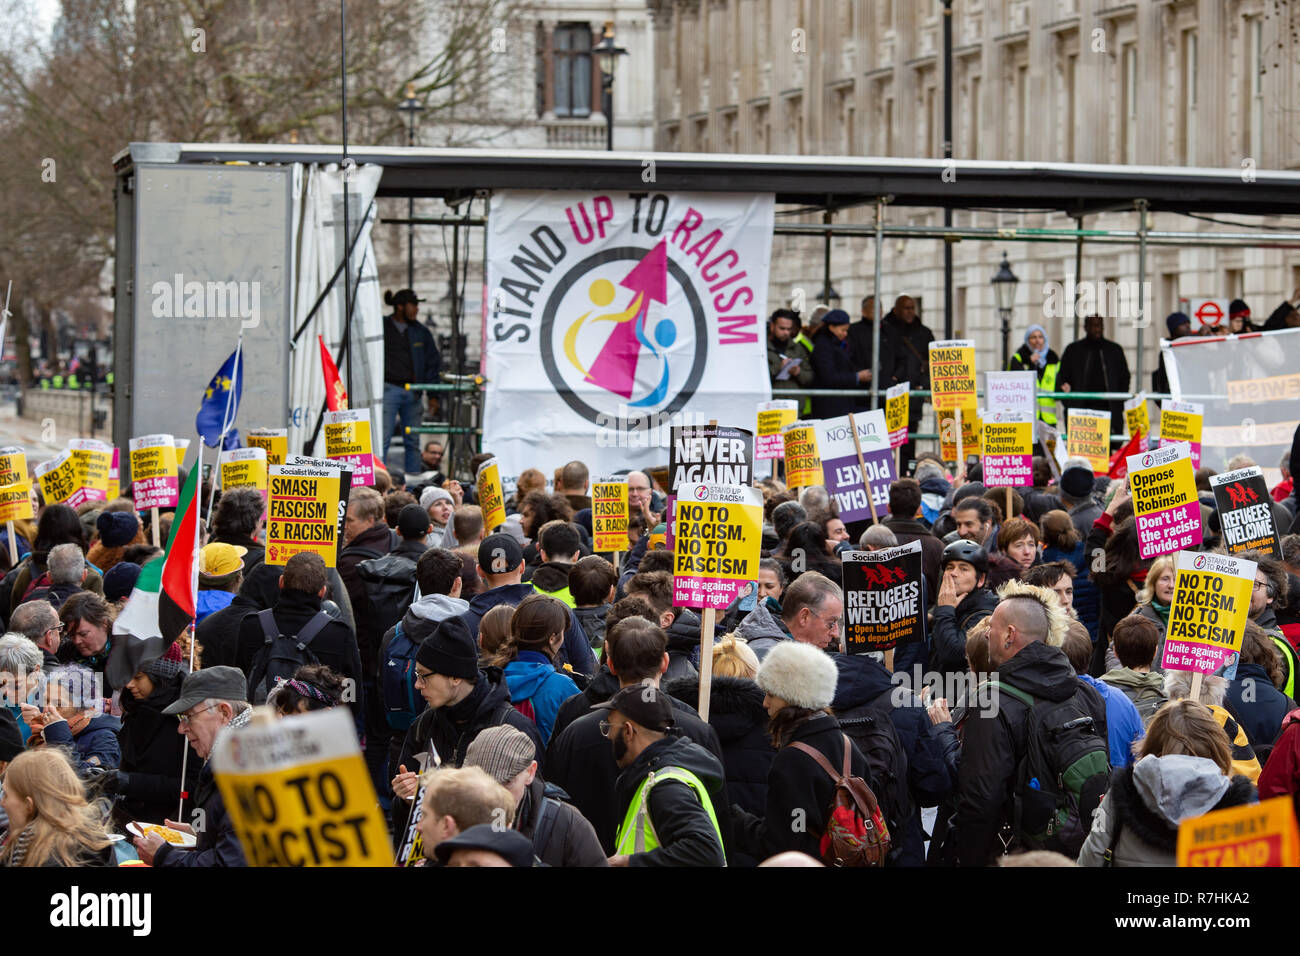 The 'Stand Up To Racism' stage set up for the Anti-Facist demonstration.   3,000 Pro-Brexit demonstrators and 15,000 Anti-Facist counter demonstrators took to the streets of London to voice their stance on the deal ahead of the key Brexit vote in parliament this Tuesday. Stock Photo